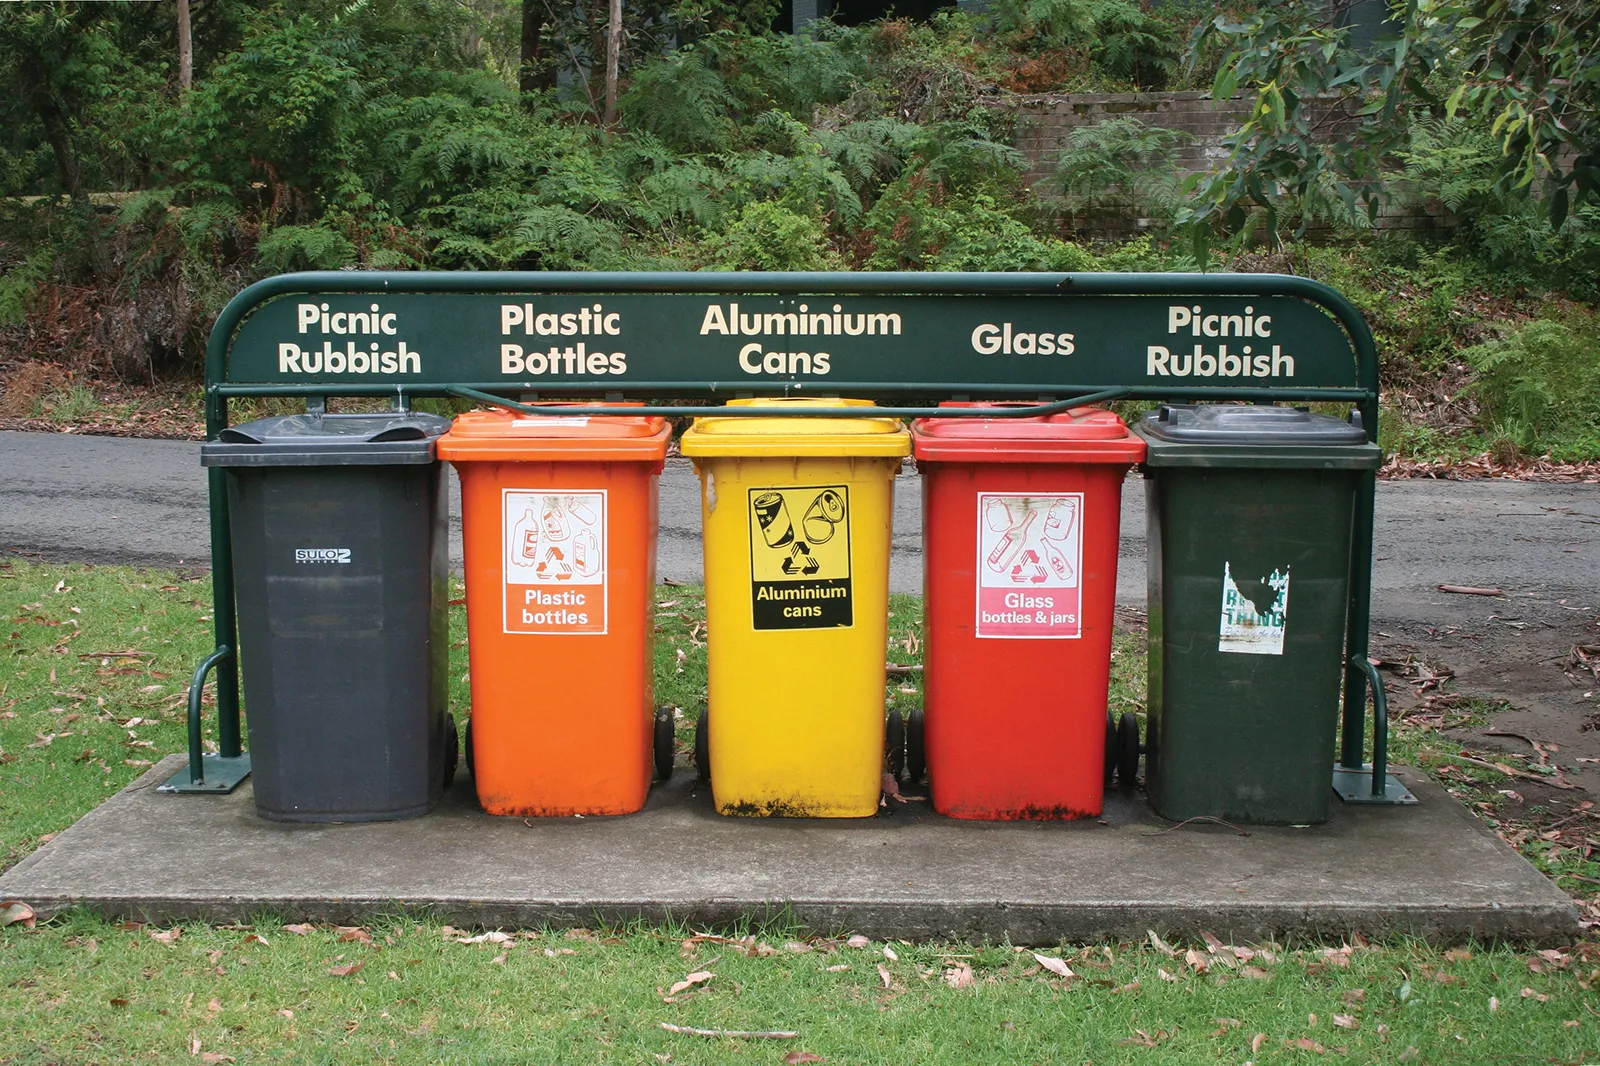 What Are The Benefits Of Disposing Of Garbage In Its Place?